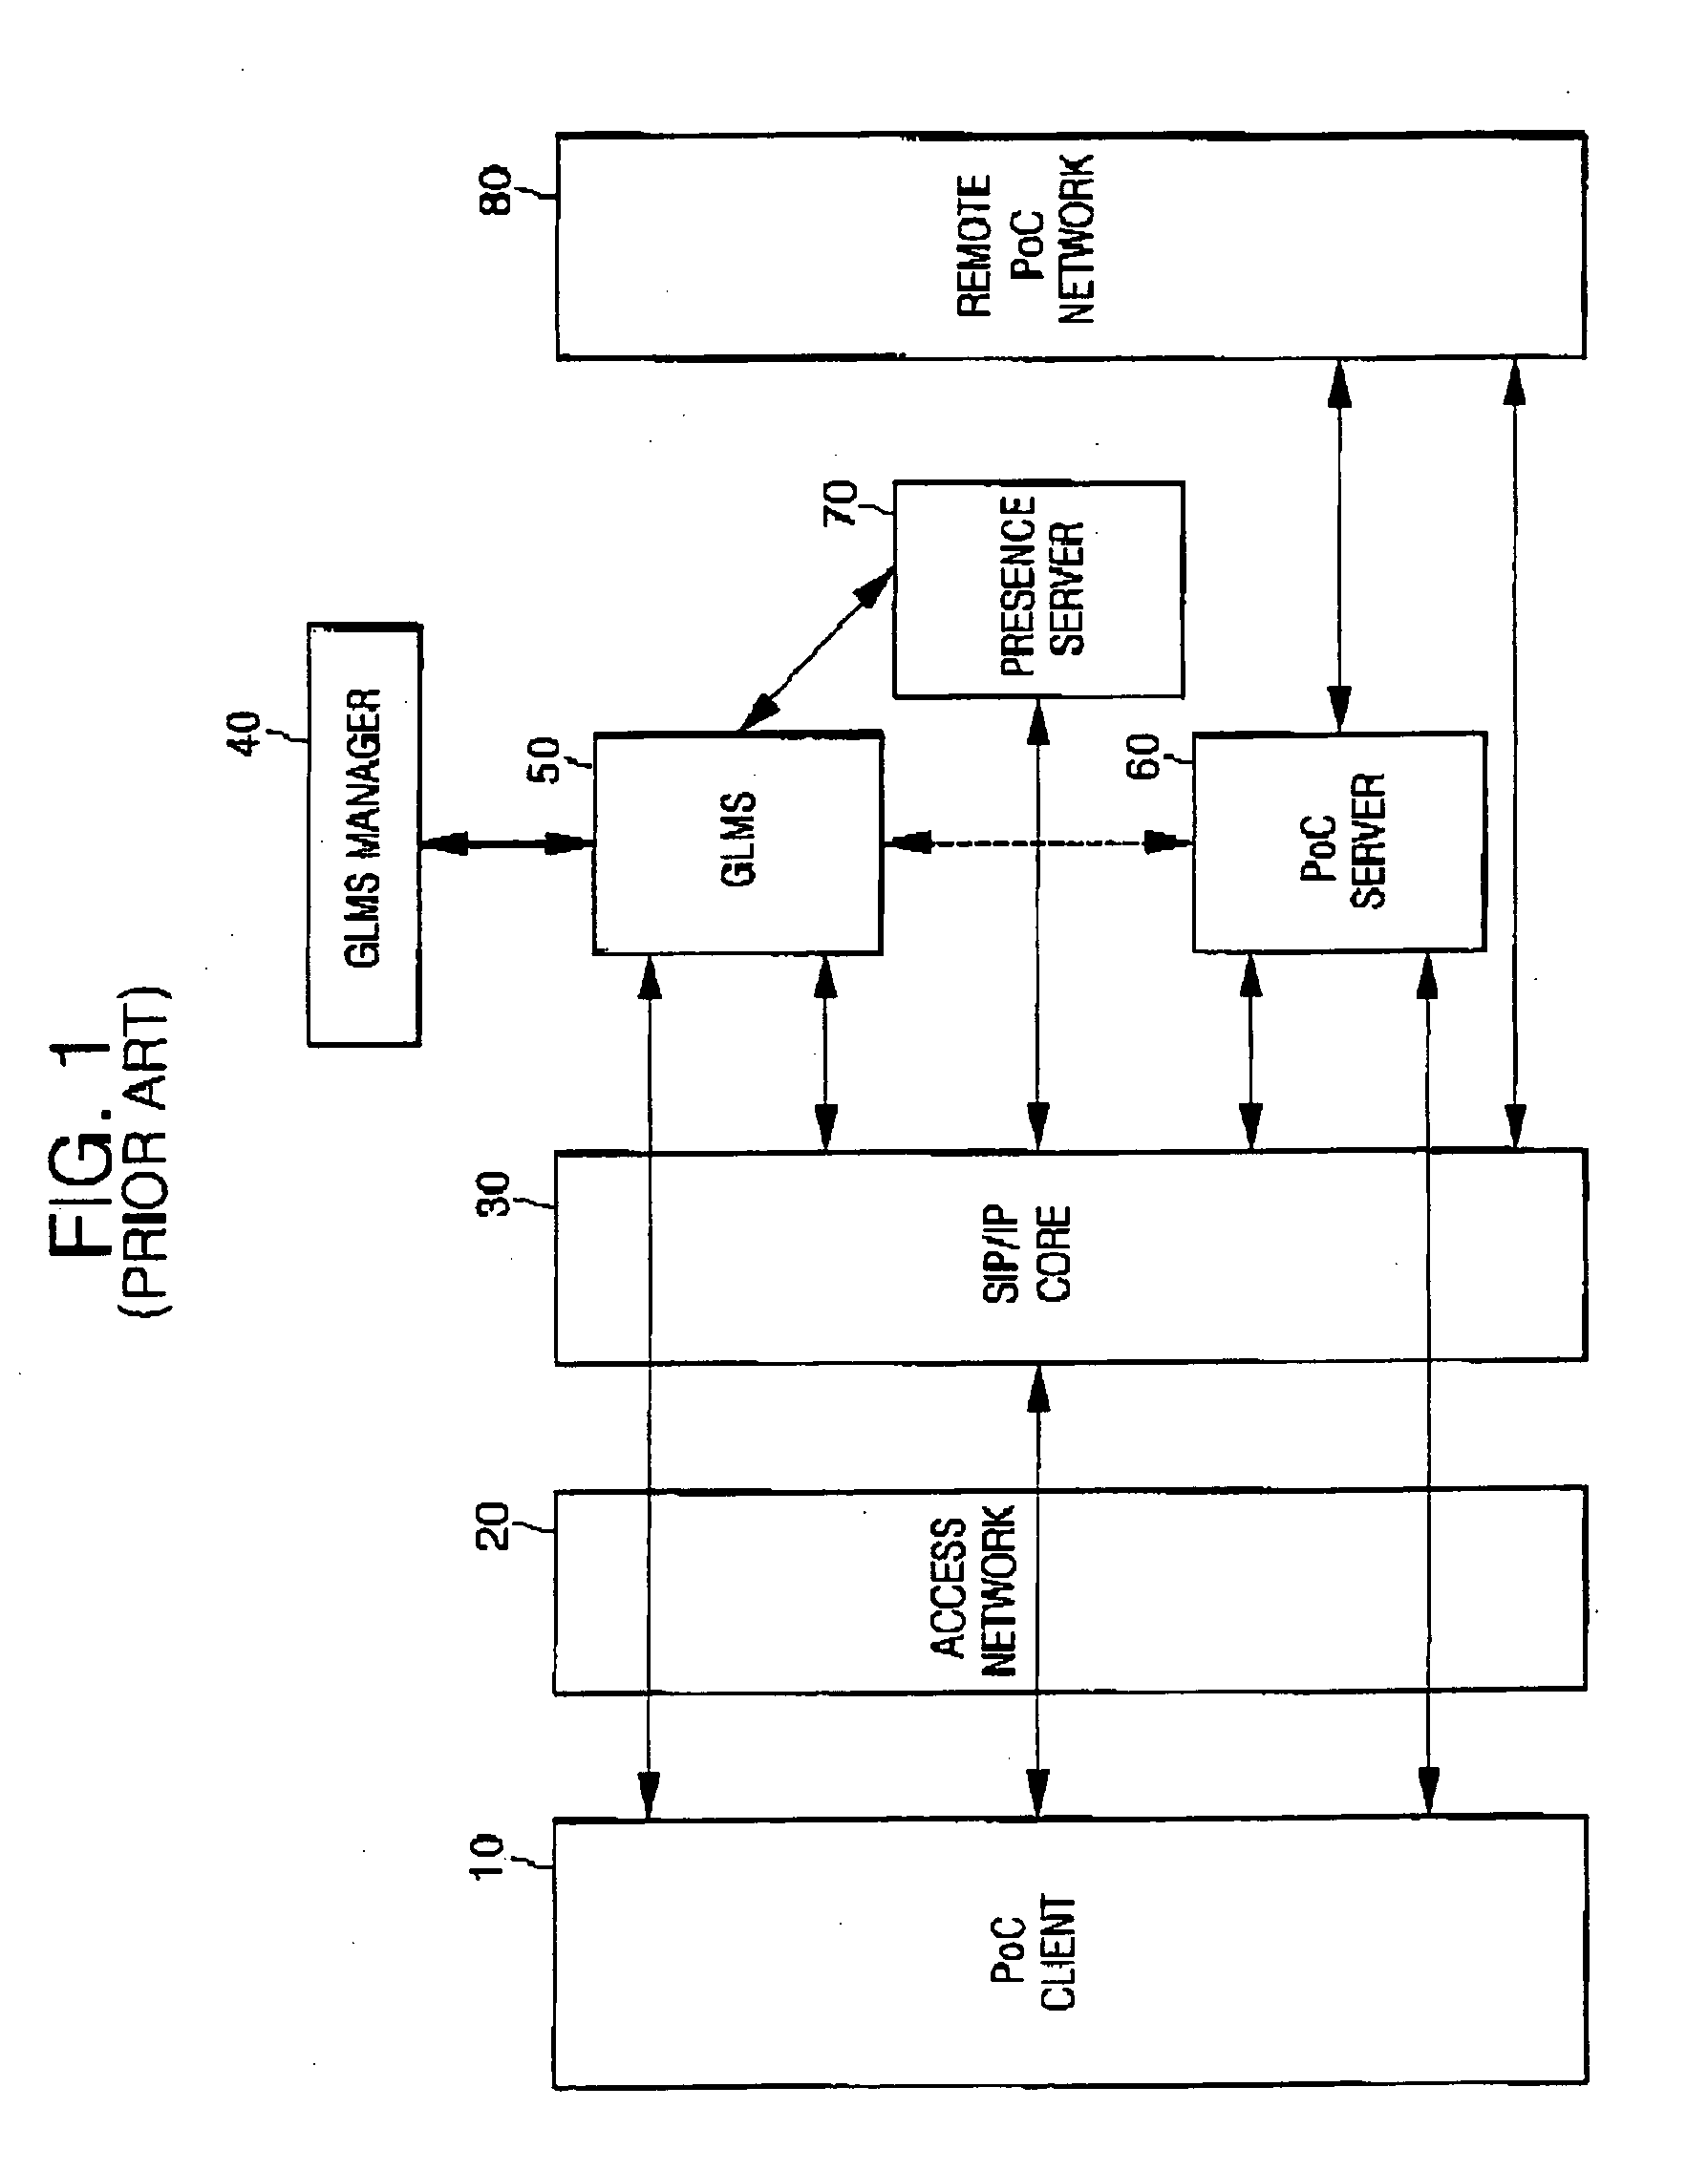 Call processing system and method based on answer mode of push to talk over cellular user